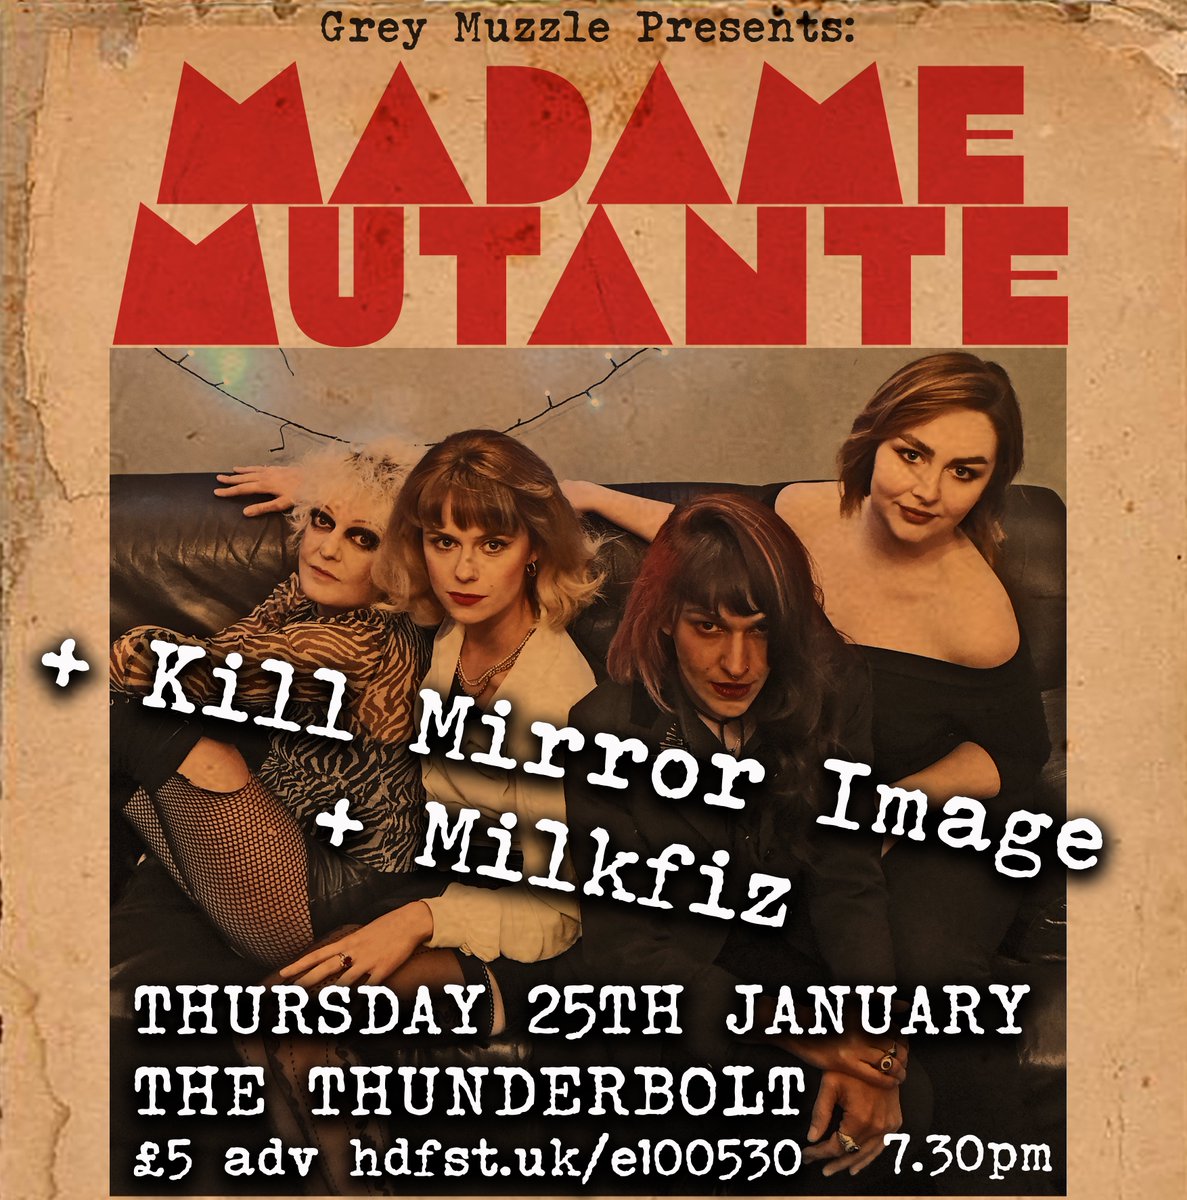 HEY BRISTOL what you doing on Thursday? @Heelz 's new band Madame Mutante are playing @Thunderbolt_pub and it's only a fiver in! hdfst.uk/e100530